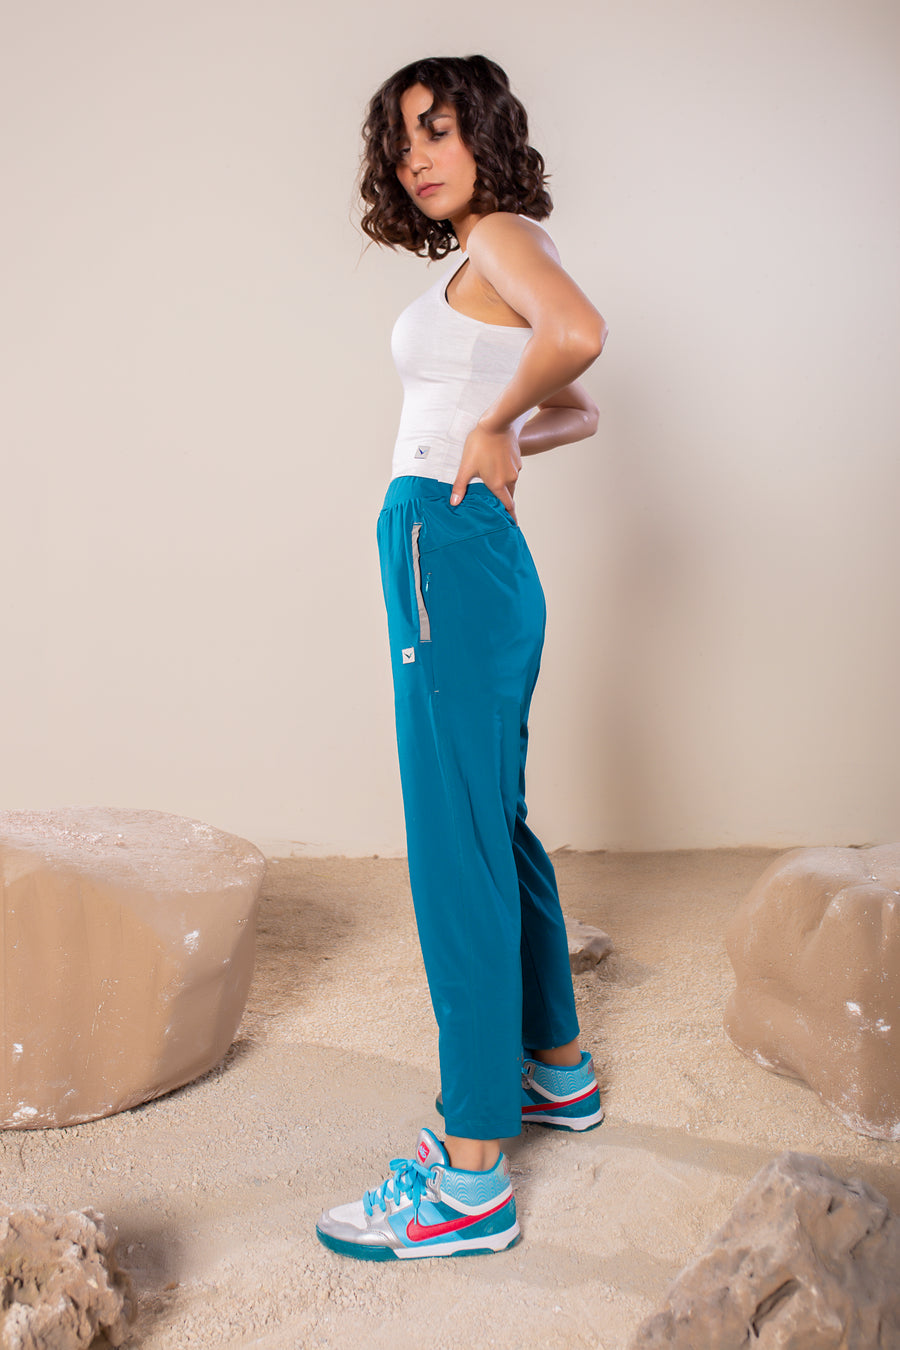 Women's Wanderlust Pant Tropical Teal | VOLO Apparel | These pants are designed to give you wanderlust, an ultralight super durable athletic pant with a five pocket design, a 3 point gusset for all your movements and a high ankle tapered bottom. The revolutional Italian nylon is patented with UPF 50 protection and extreme breathability. The one pant to go everywhere and do everything!